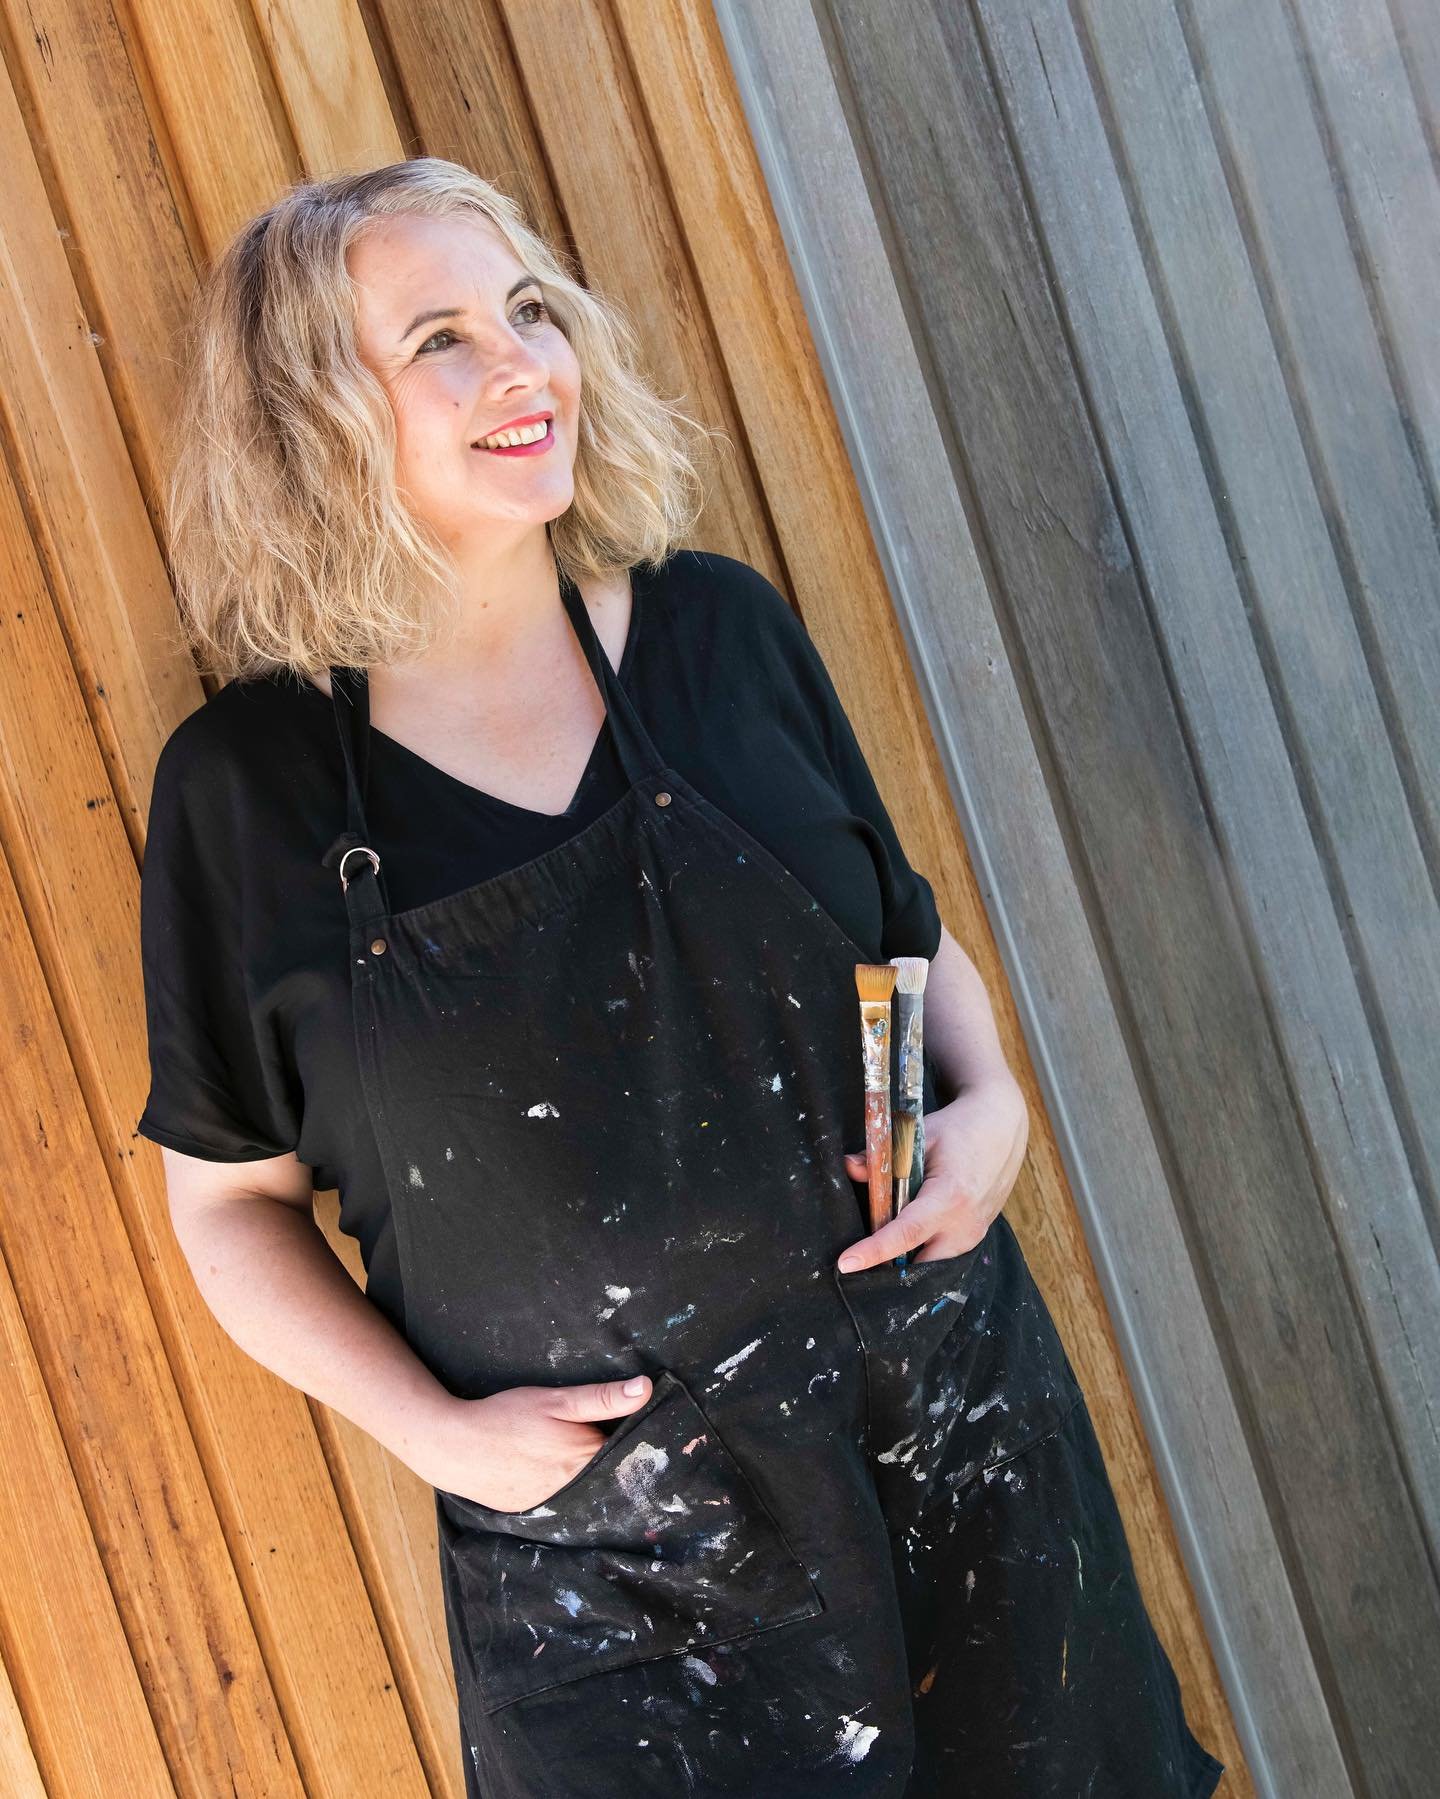 Exhibiting at Wonderground is the inaugural 2023 Barossa Women&rsquo;s Artist Residency, recipient and RMIT School of Art MFA (Research) alumnus Belinda Wilson, as she responds to her time spent in the region as part of the fully funded residency in 